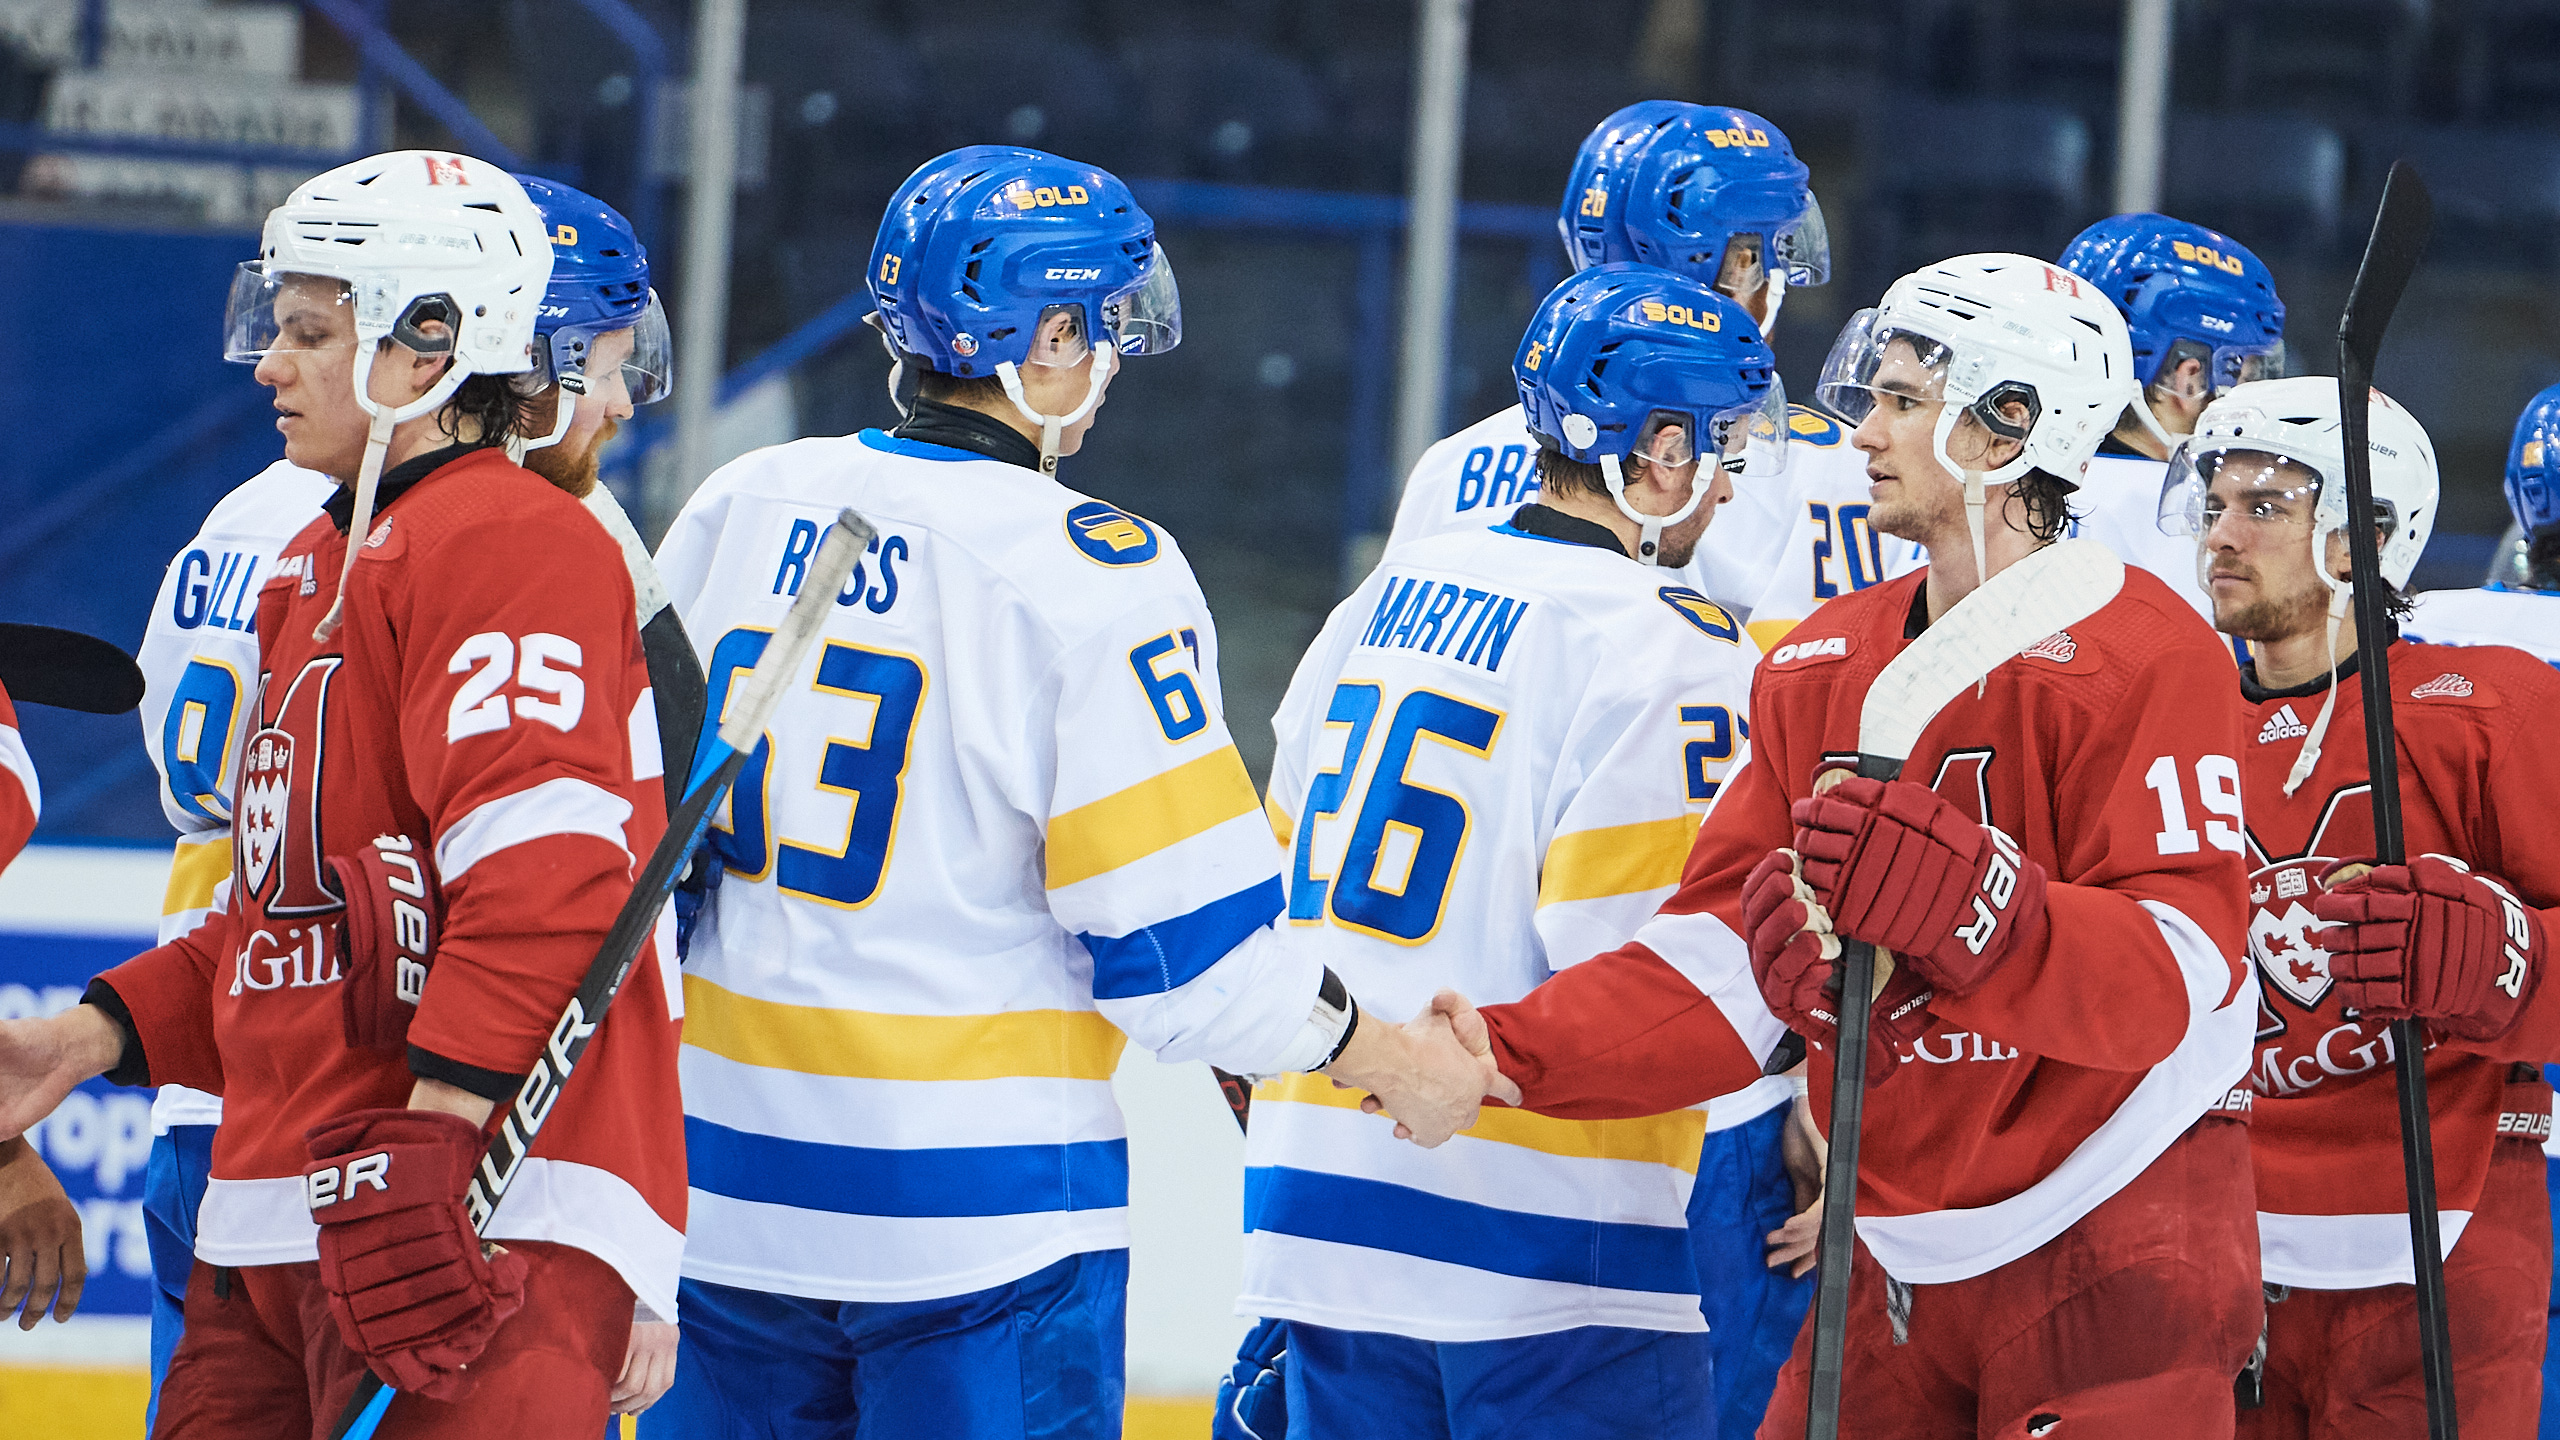 McGill and TMU players shake hands on the ice after the game